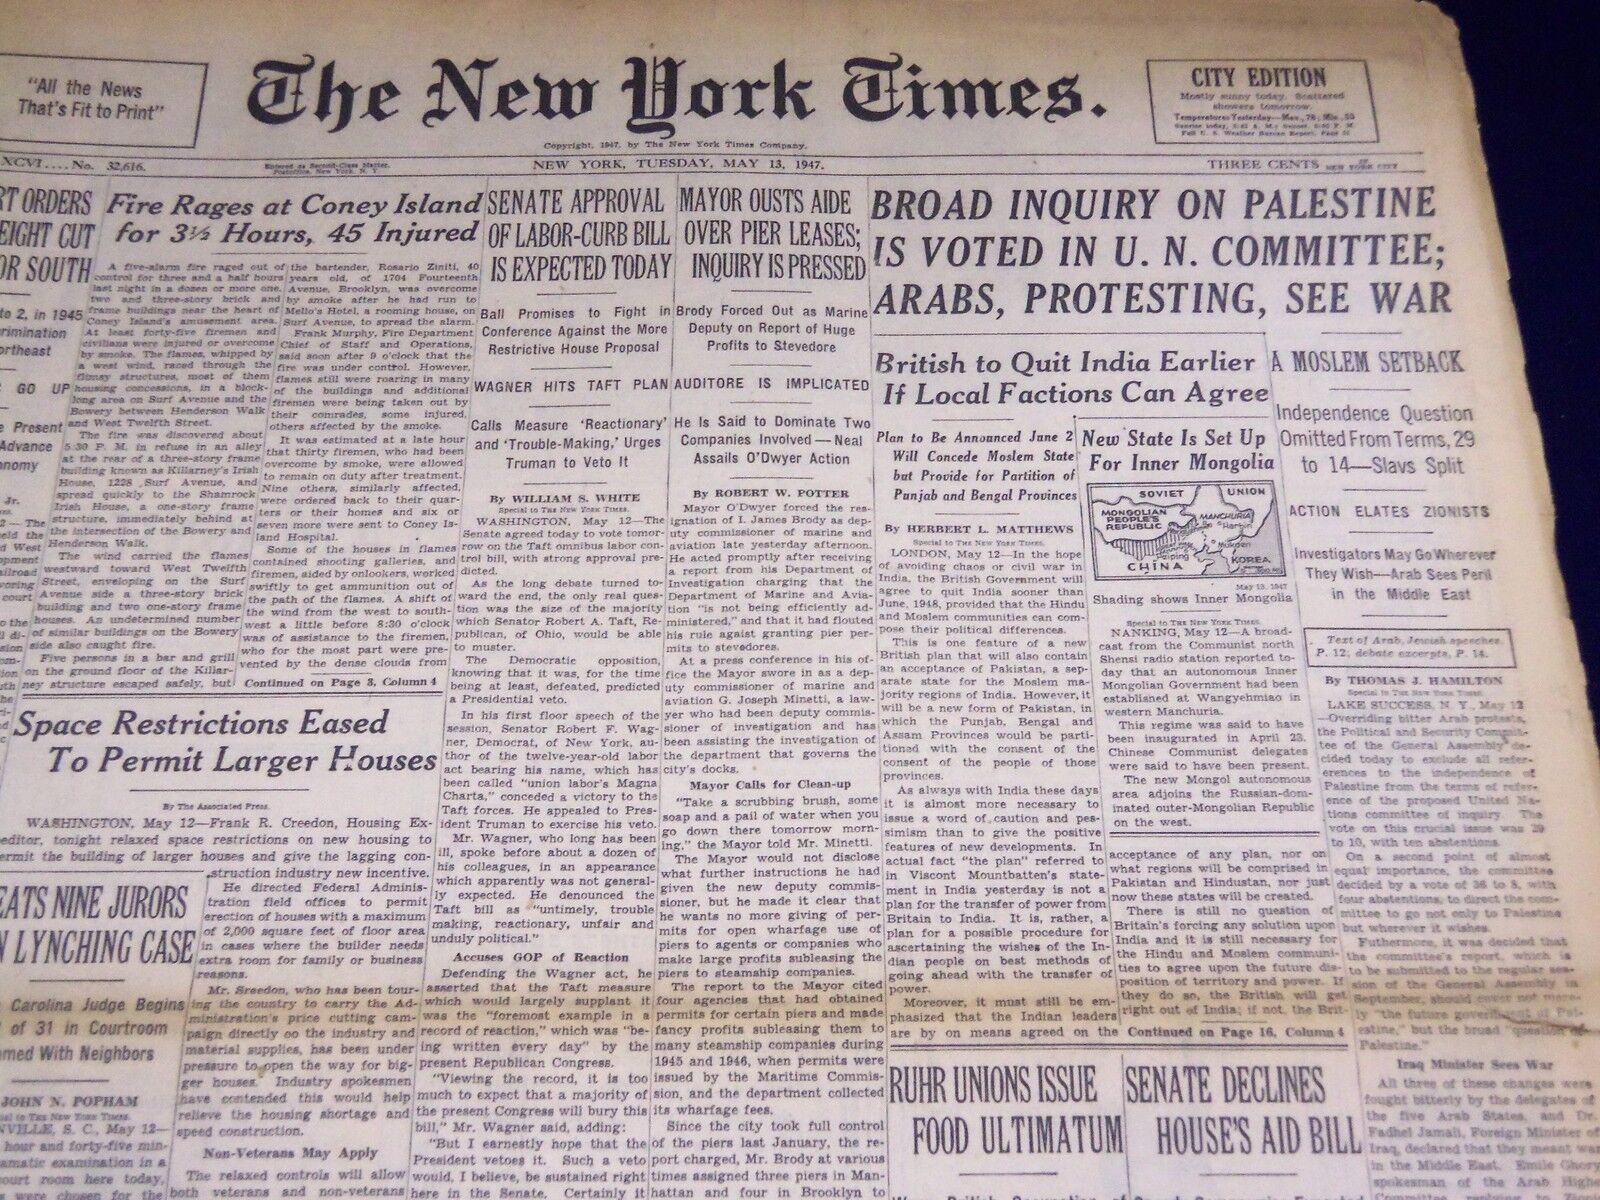 1947 MAY 13 NEW YORK TIMES - BROAD INQUIRY ON PALESTINE - NT 2769